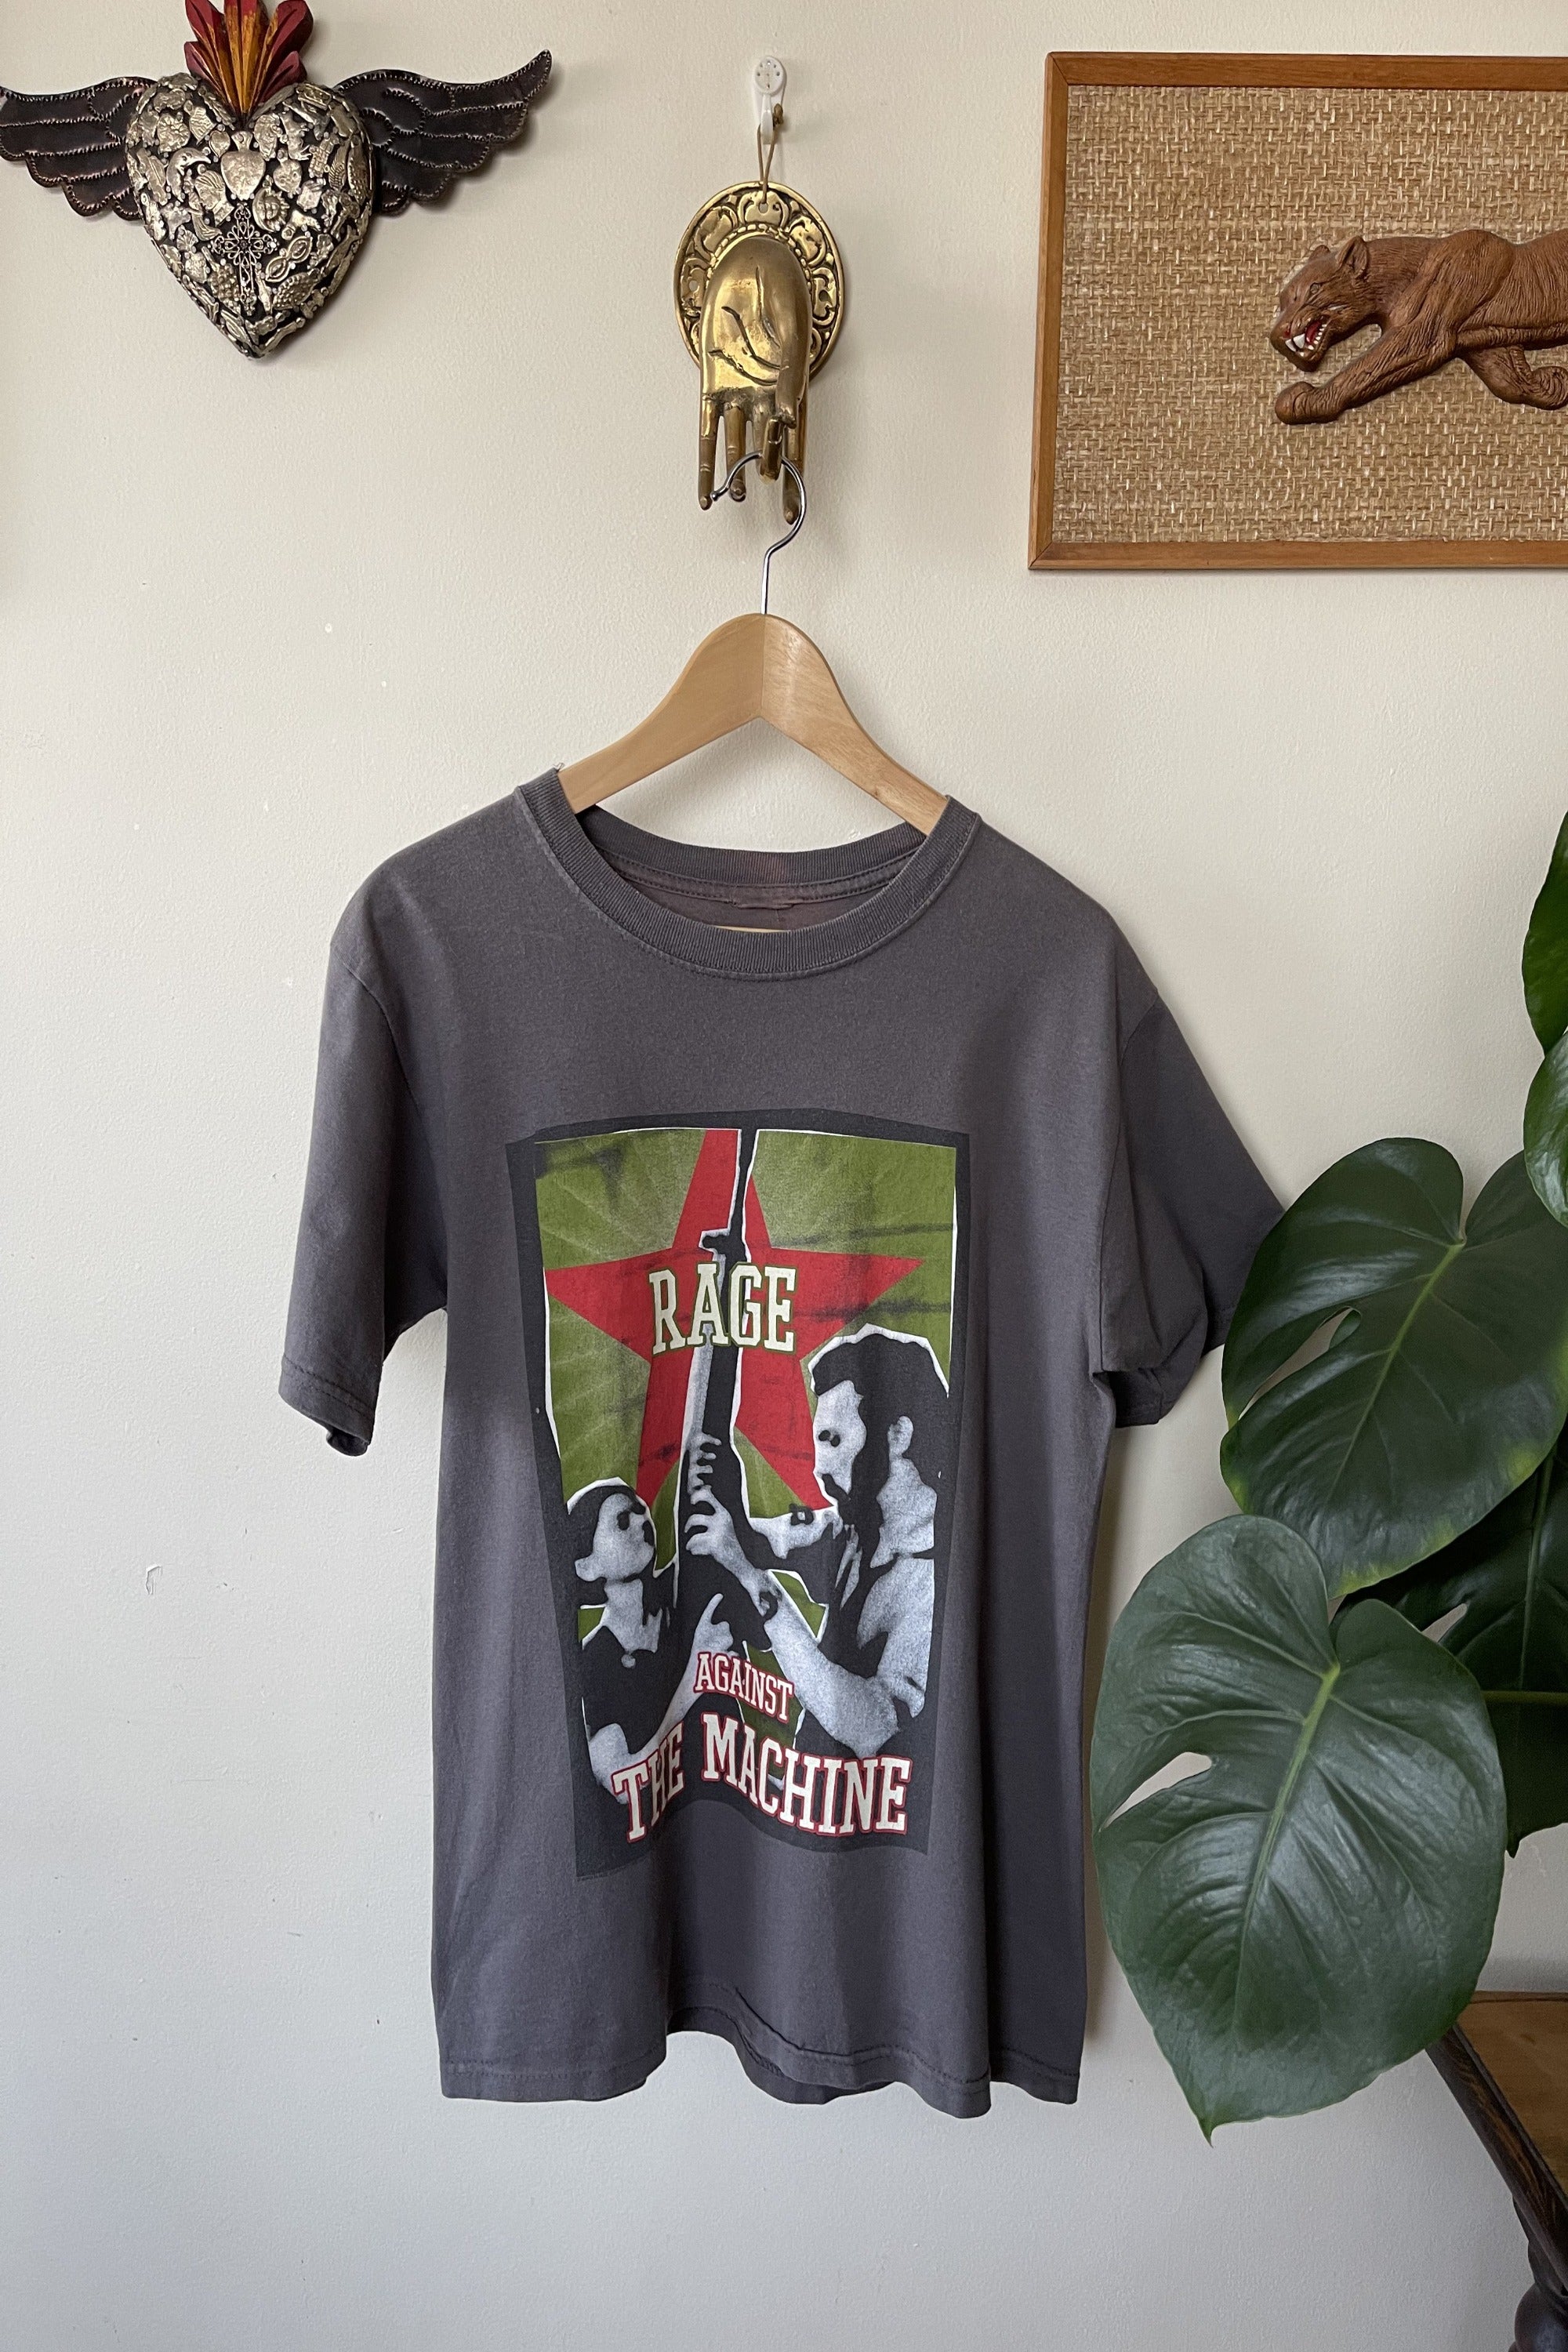 Vintage Rage Against The Machine T-shirt | Haus of Denim and Lace